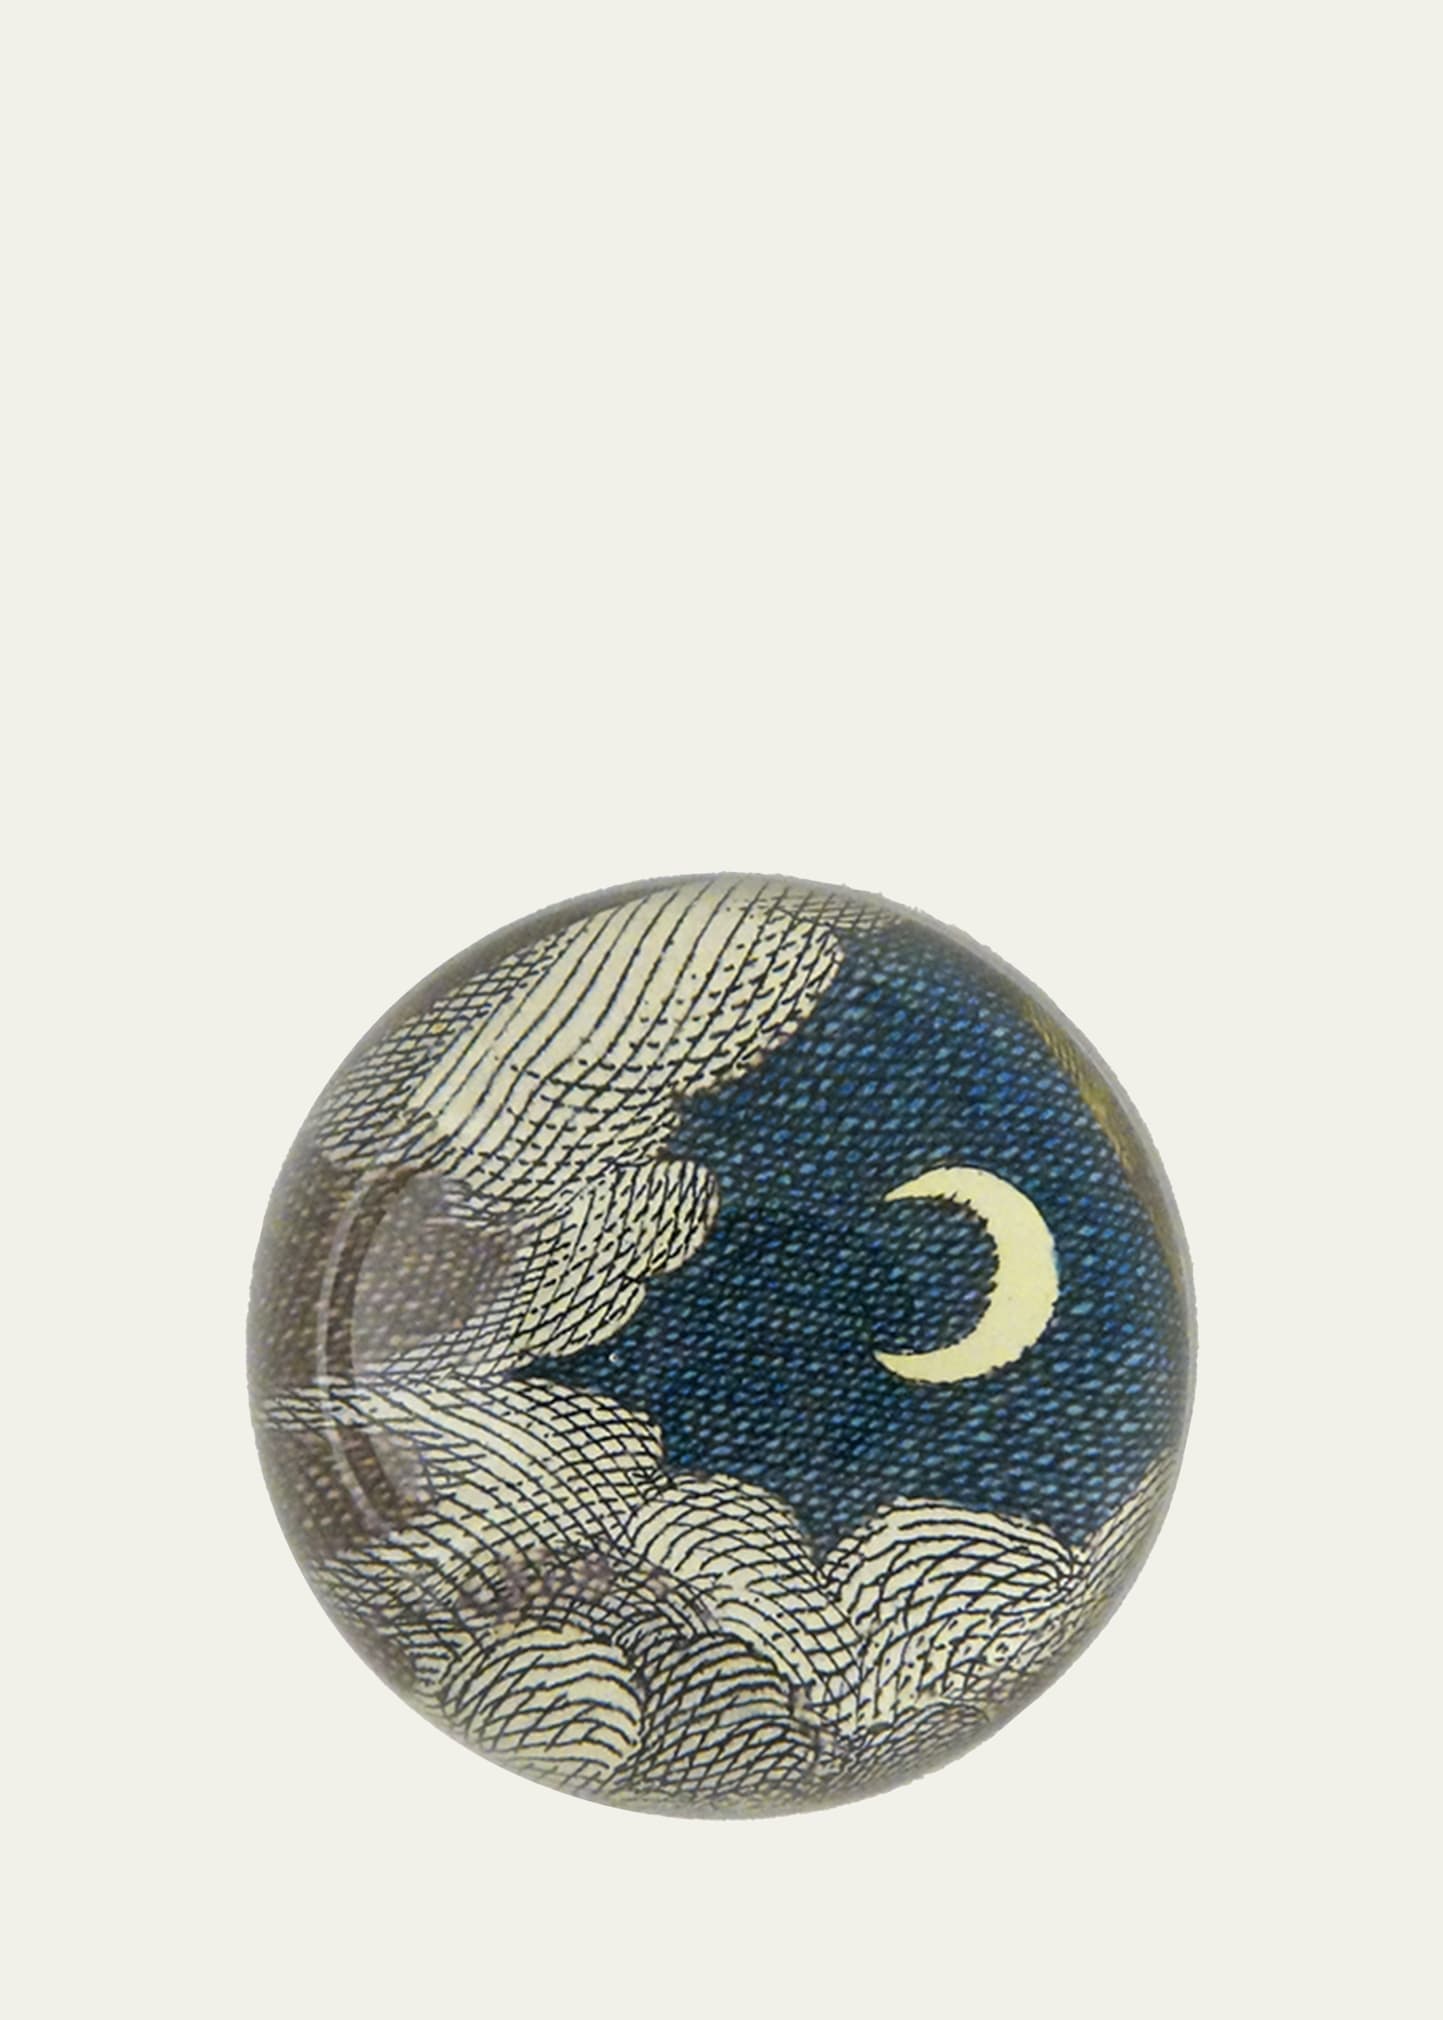 John Derian Peacock Dome Paperweight In Multi